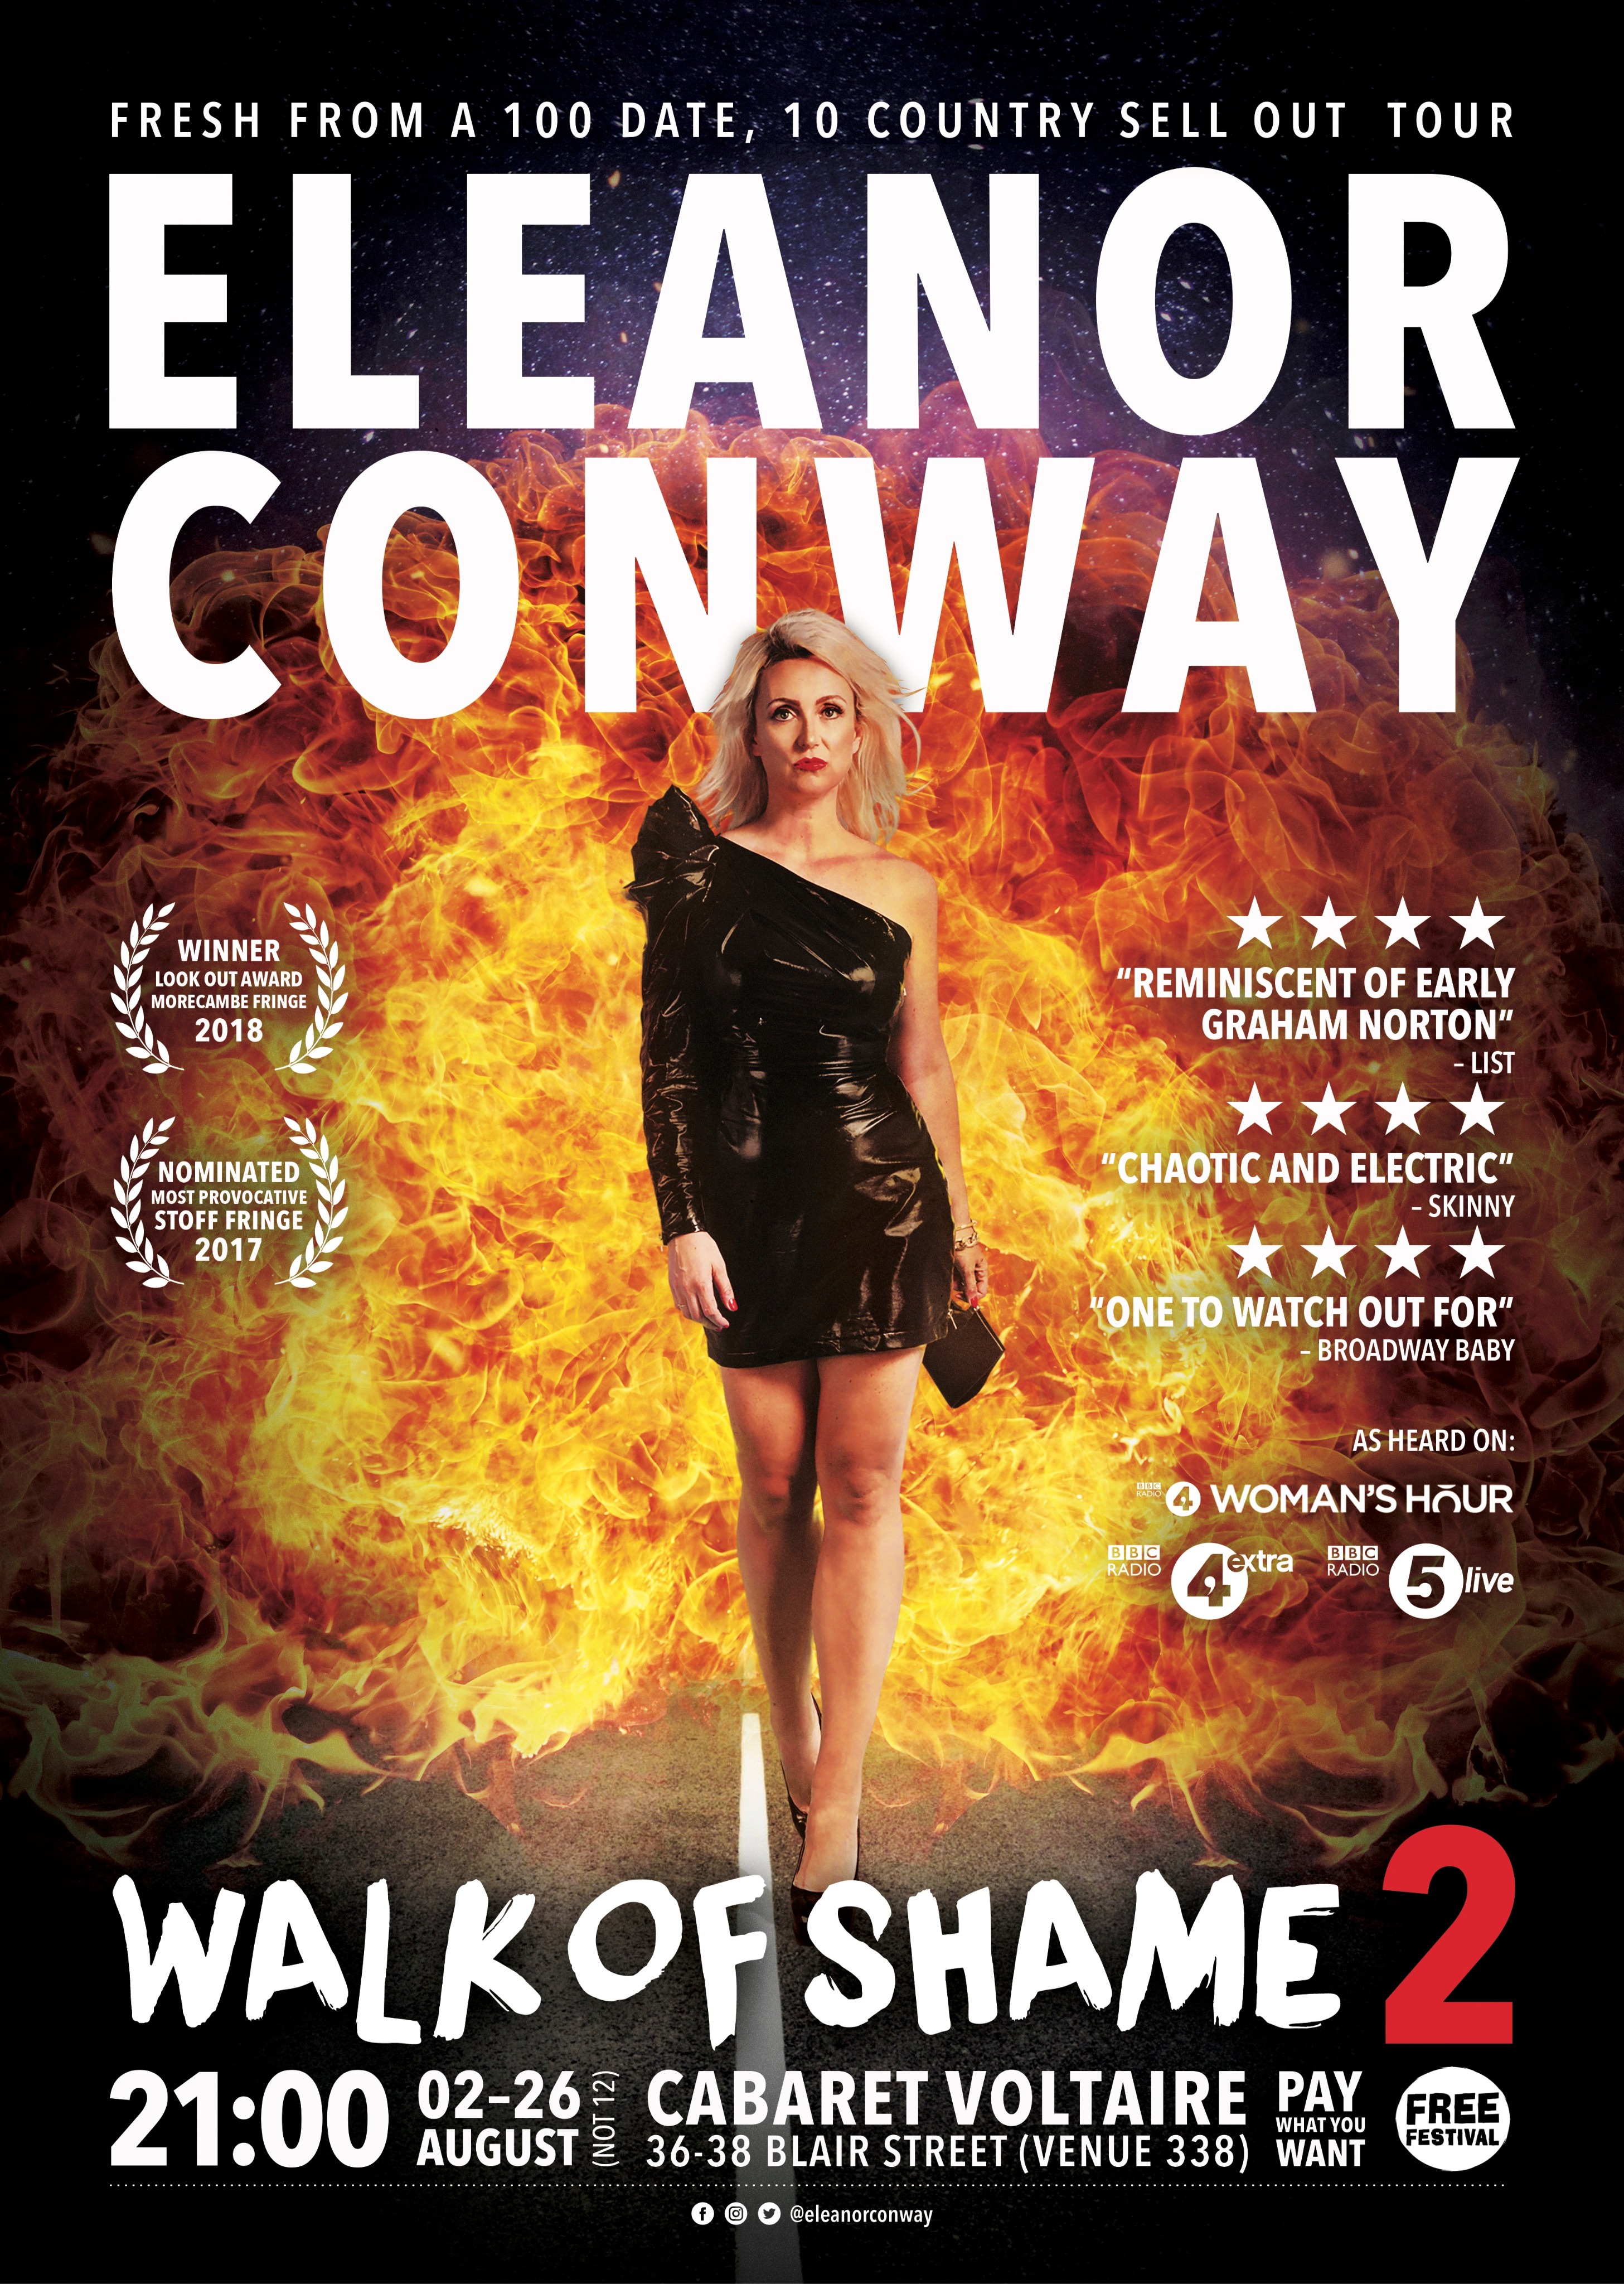 The poster for Eleanor Conway: Walk of Shame 2